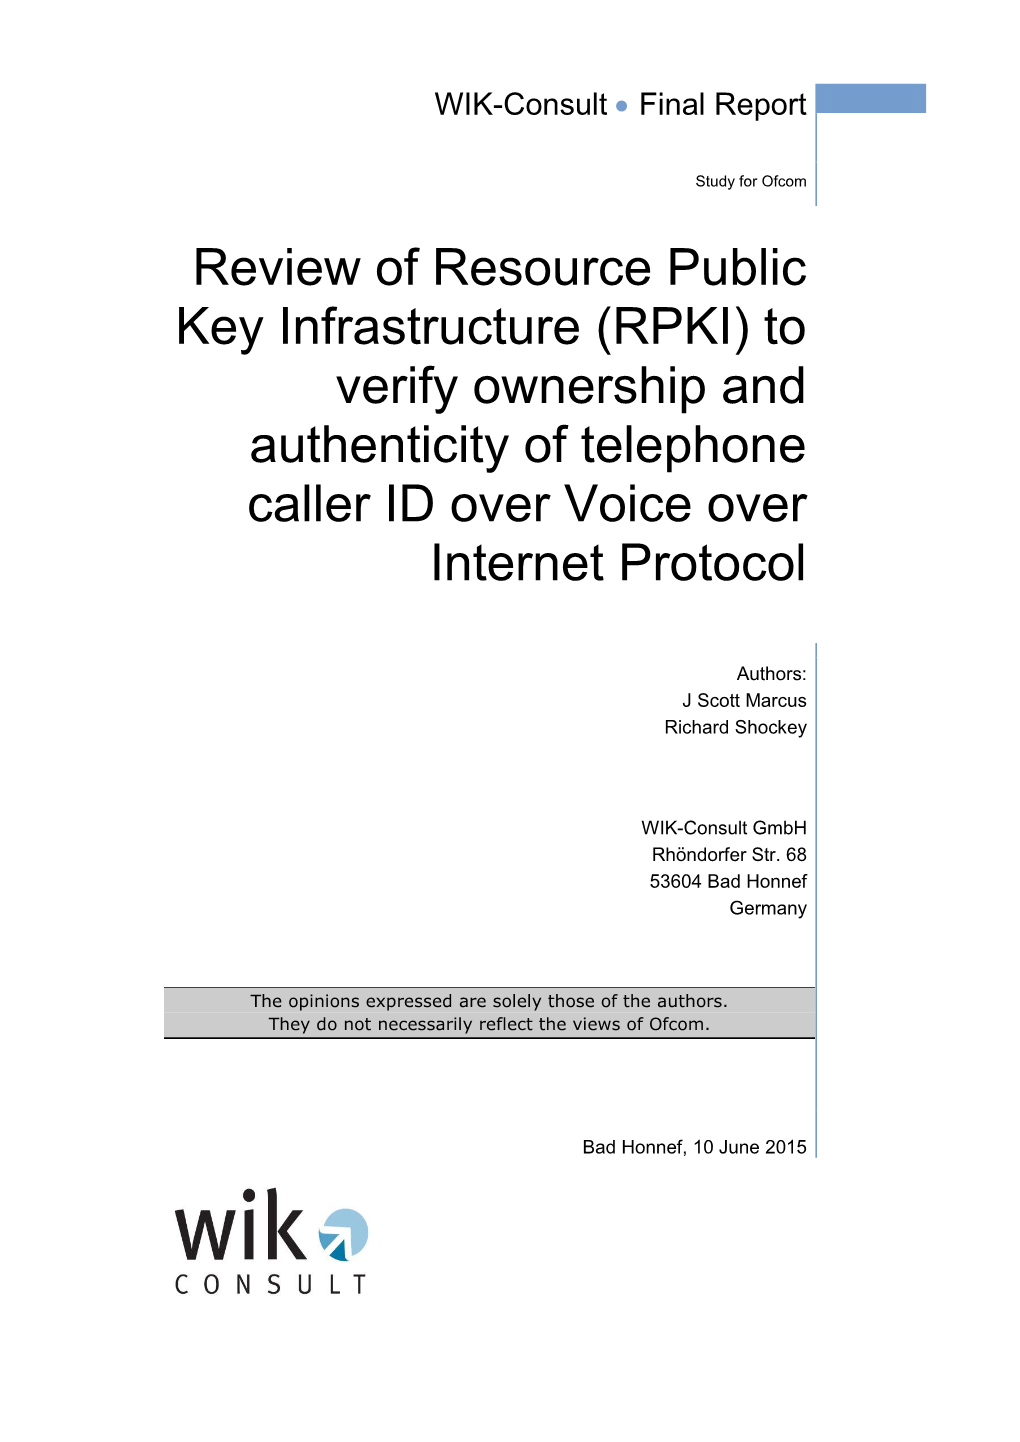 (RPKI) to Verify Ownership and Authenticity of Telephone Caller ID Over Voice Over Internet Protocol